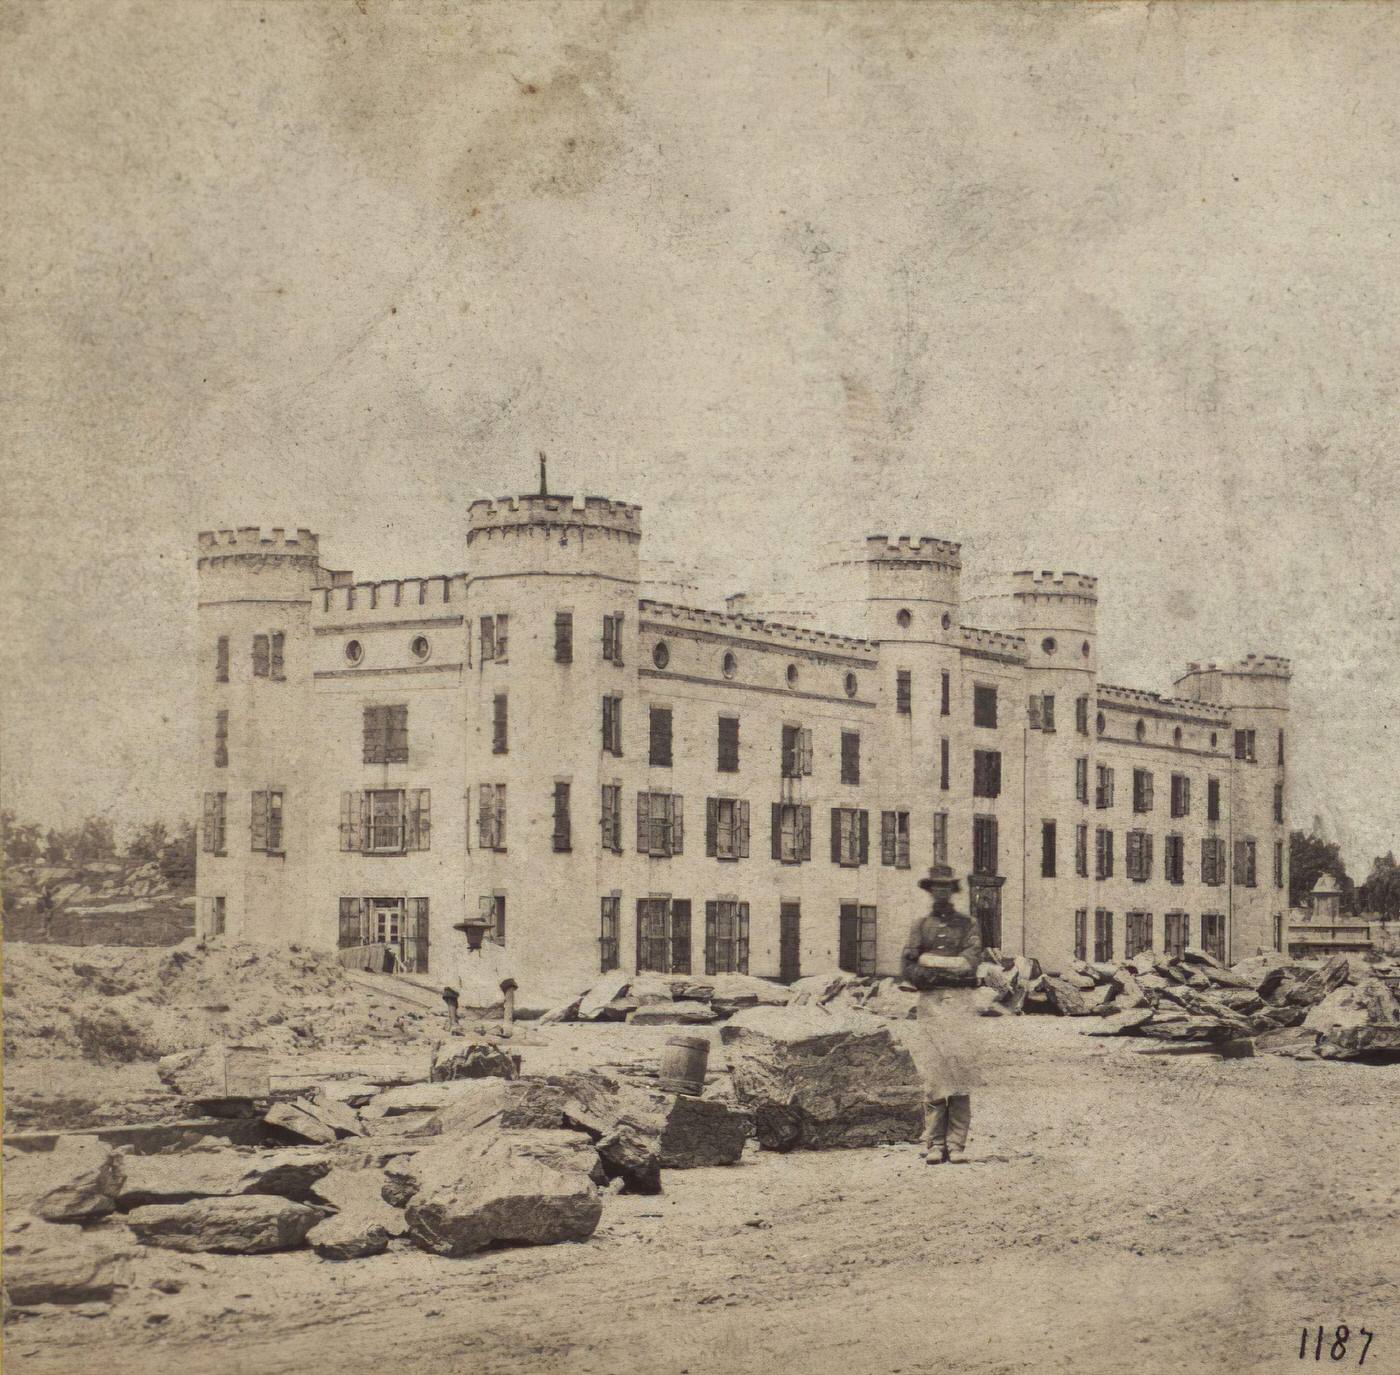 The Old Arsenal, Central Park, Manhattan, 1865